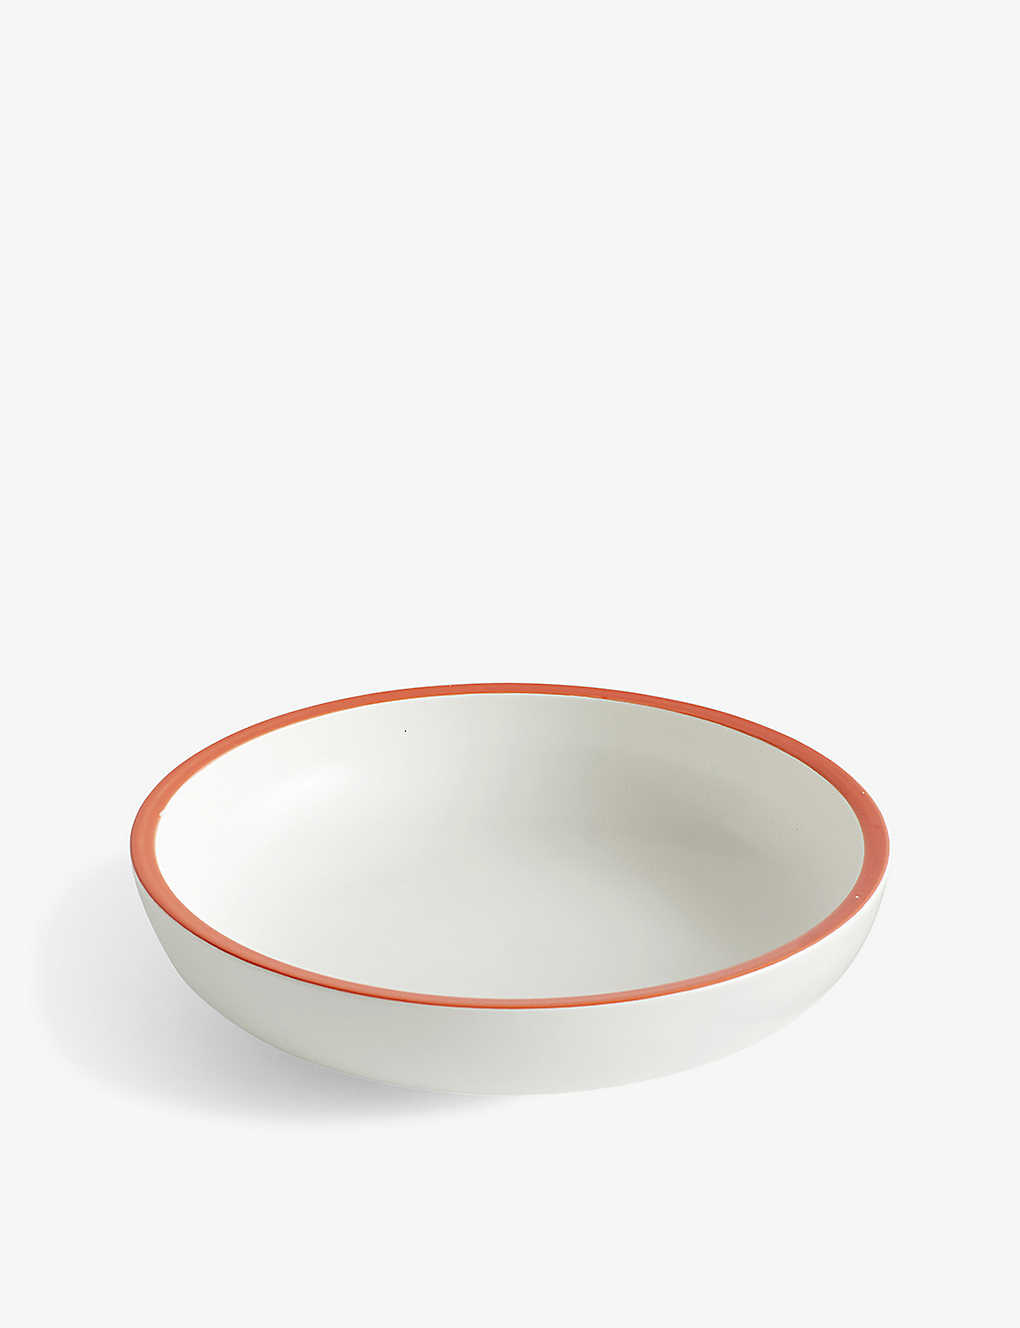 Hay White With Red Rim Sobremesa Small Porcelain Serving Bowl 20cm